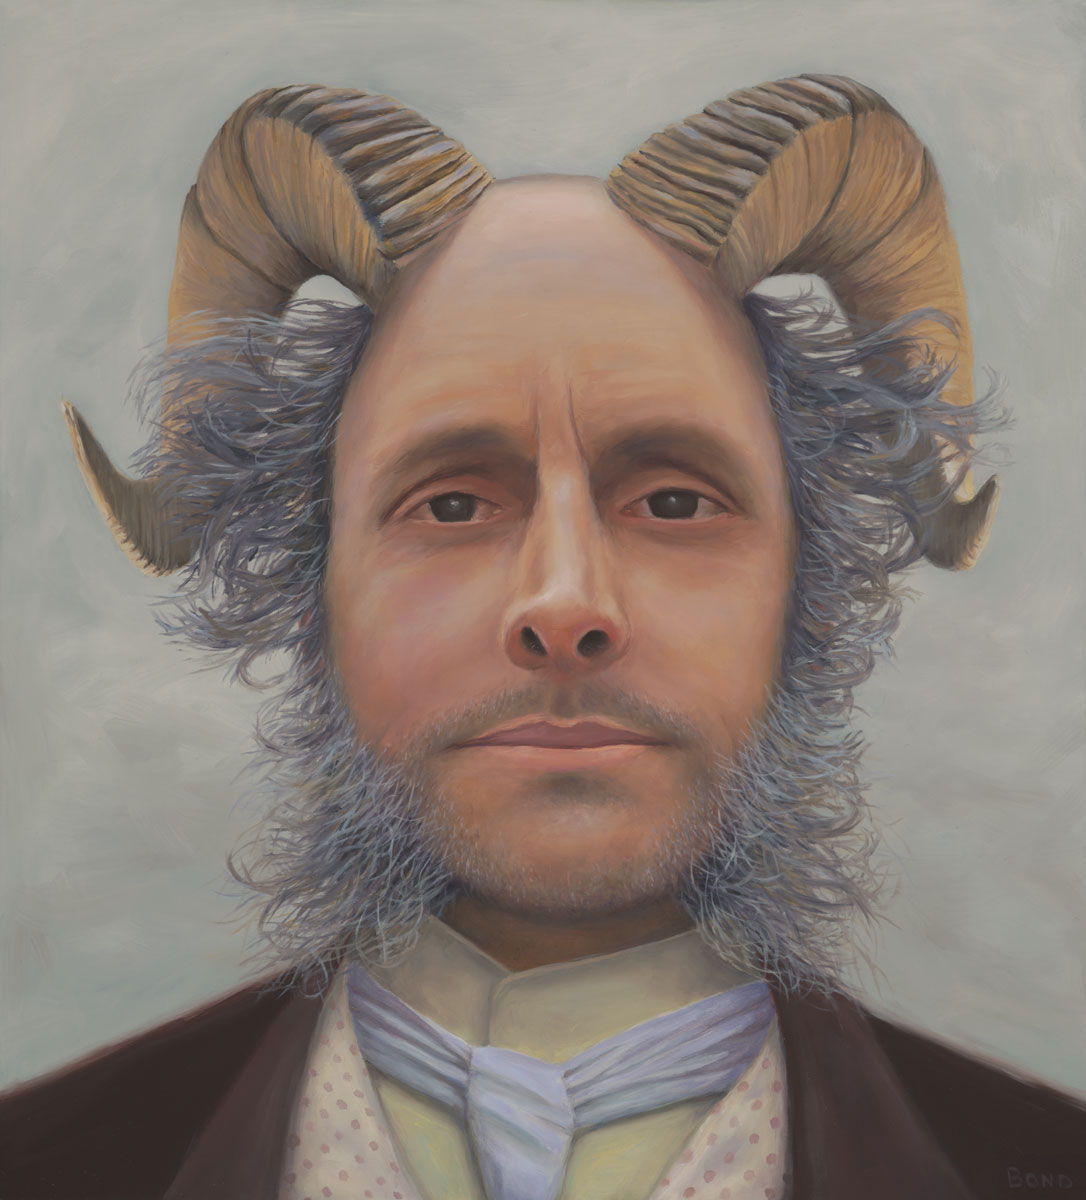 Prof. Thaddeus Steadman Lectures on the Moral Implications of Primal Urgings, painting of a 19th century professor with goat horns coming out of his head, Man, portrait, 19th Century, professor, lecture, goat, ram, horns, pan, beard, trompe l'oeil, soulful uplifting inspirational art, soul stirring illusion art, romantic art,  surrealism, surreal art, dreamlike imagery, fanciful art, fantasy art, dreamscape visual, metaphysical art, spiritual painting, metaphysical painting, spiritual art, whimsical art, whimsy art, dream art, fantastic realism art, magic realism oil painting by Paul Bond